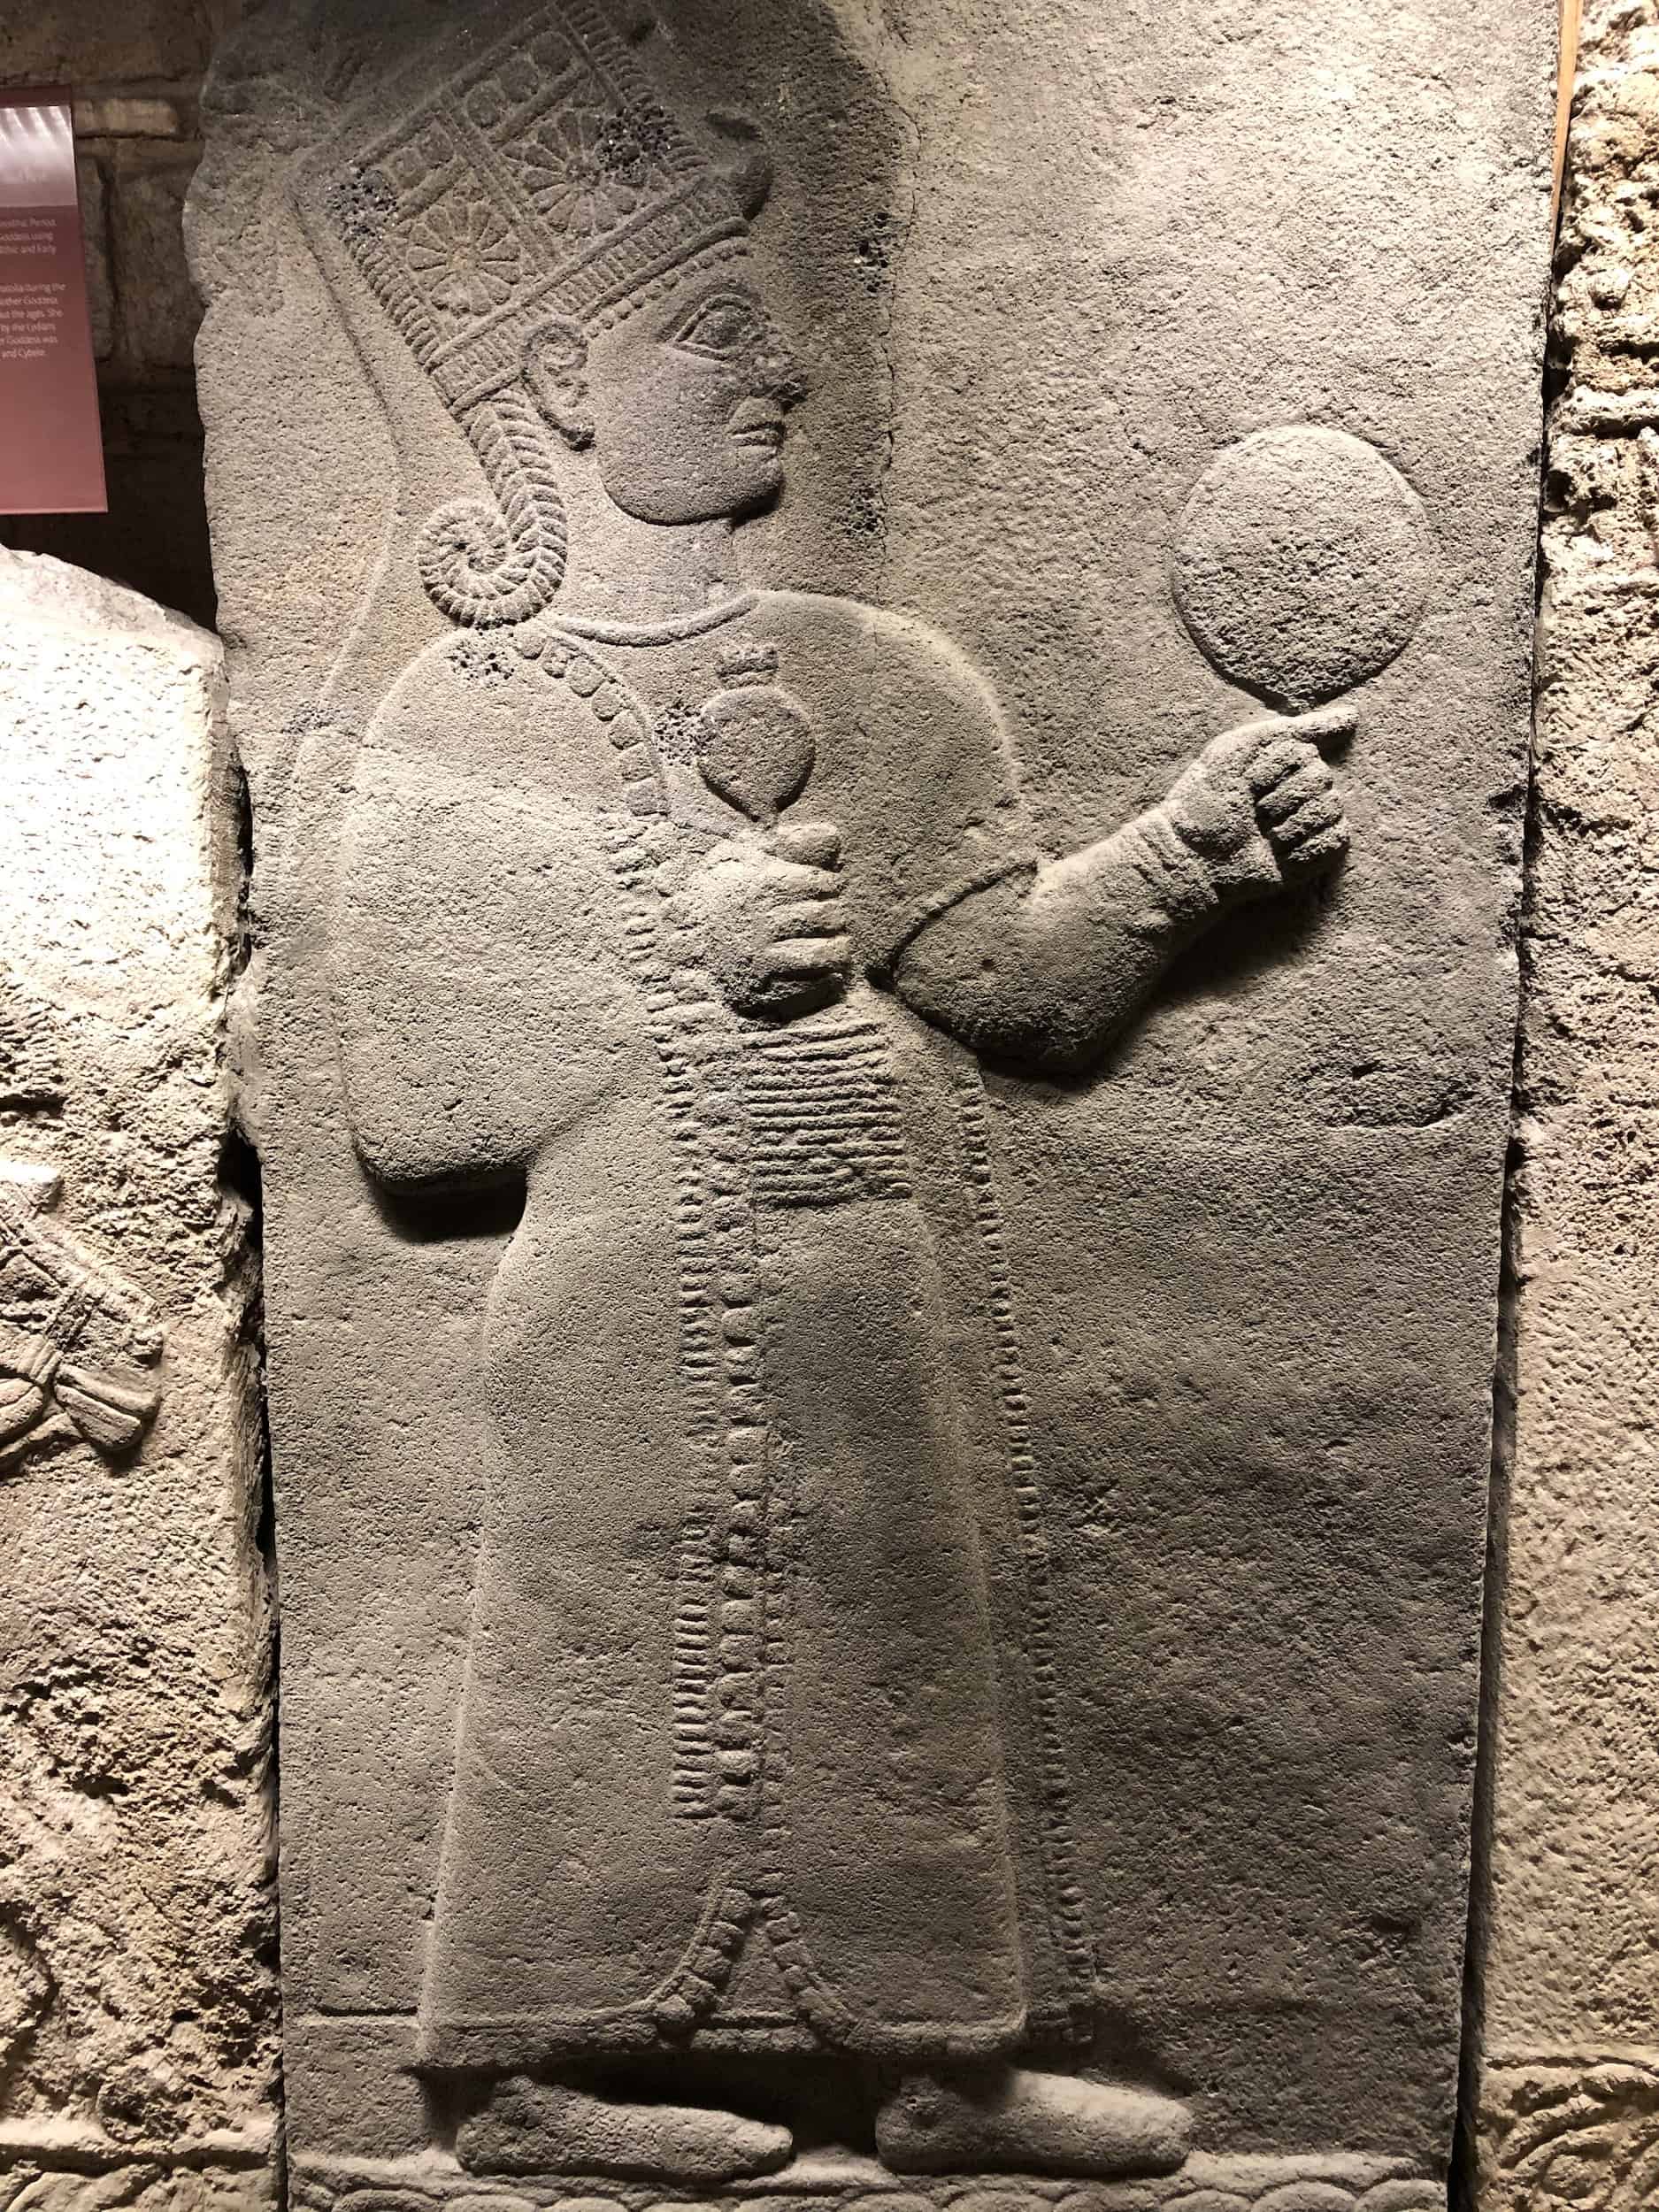 Relief of the goddess Kubaba on the orthostats of the Long Wall (Hittite - Kargamış) at the Museum of Anatolian Civilizations in Ankara, Turkey